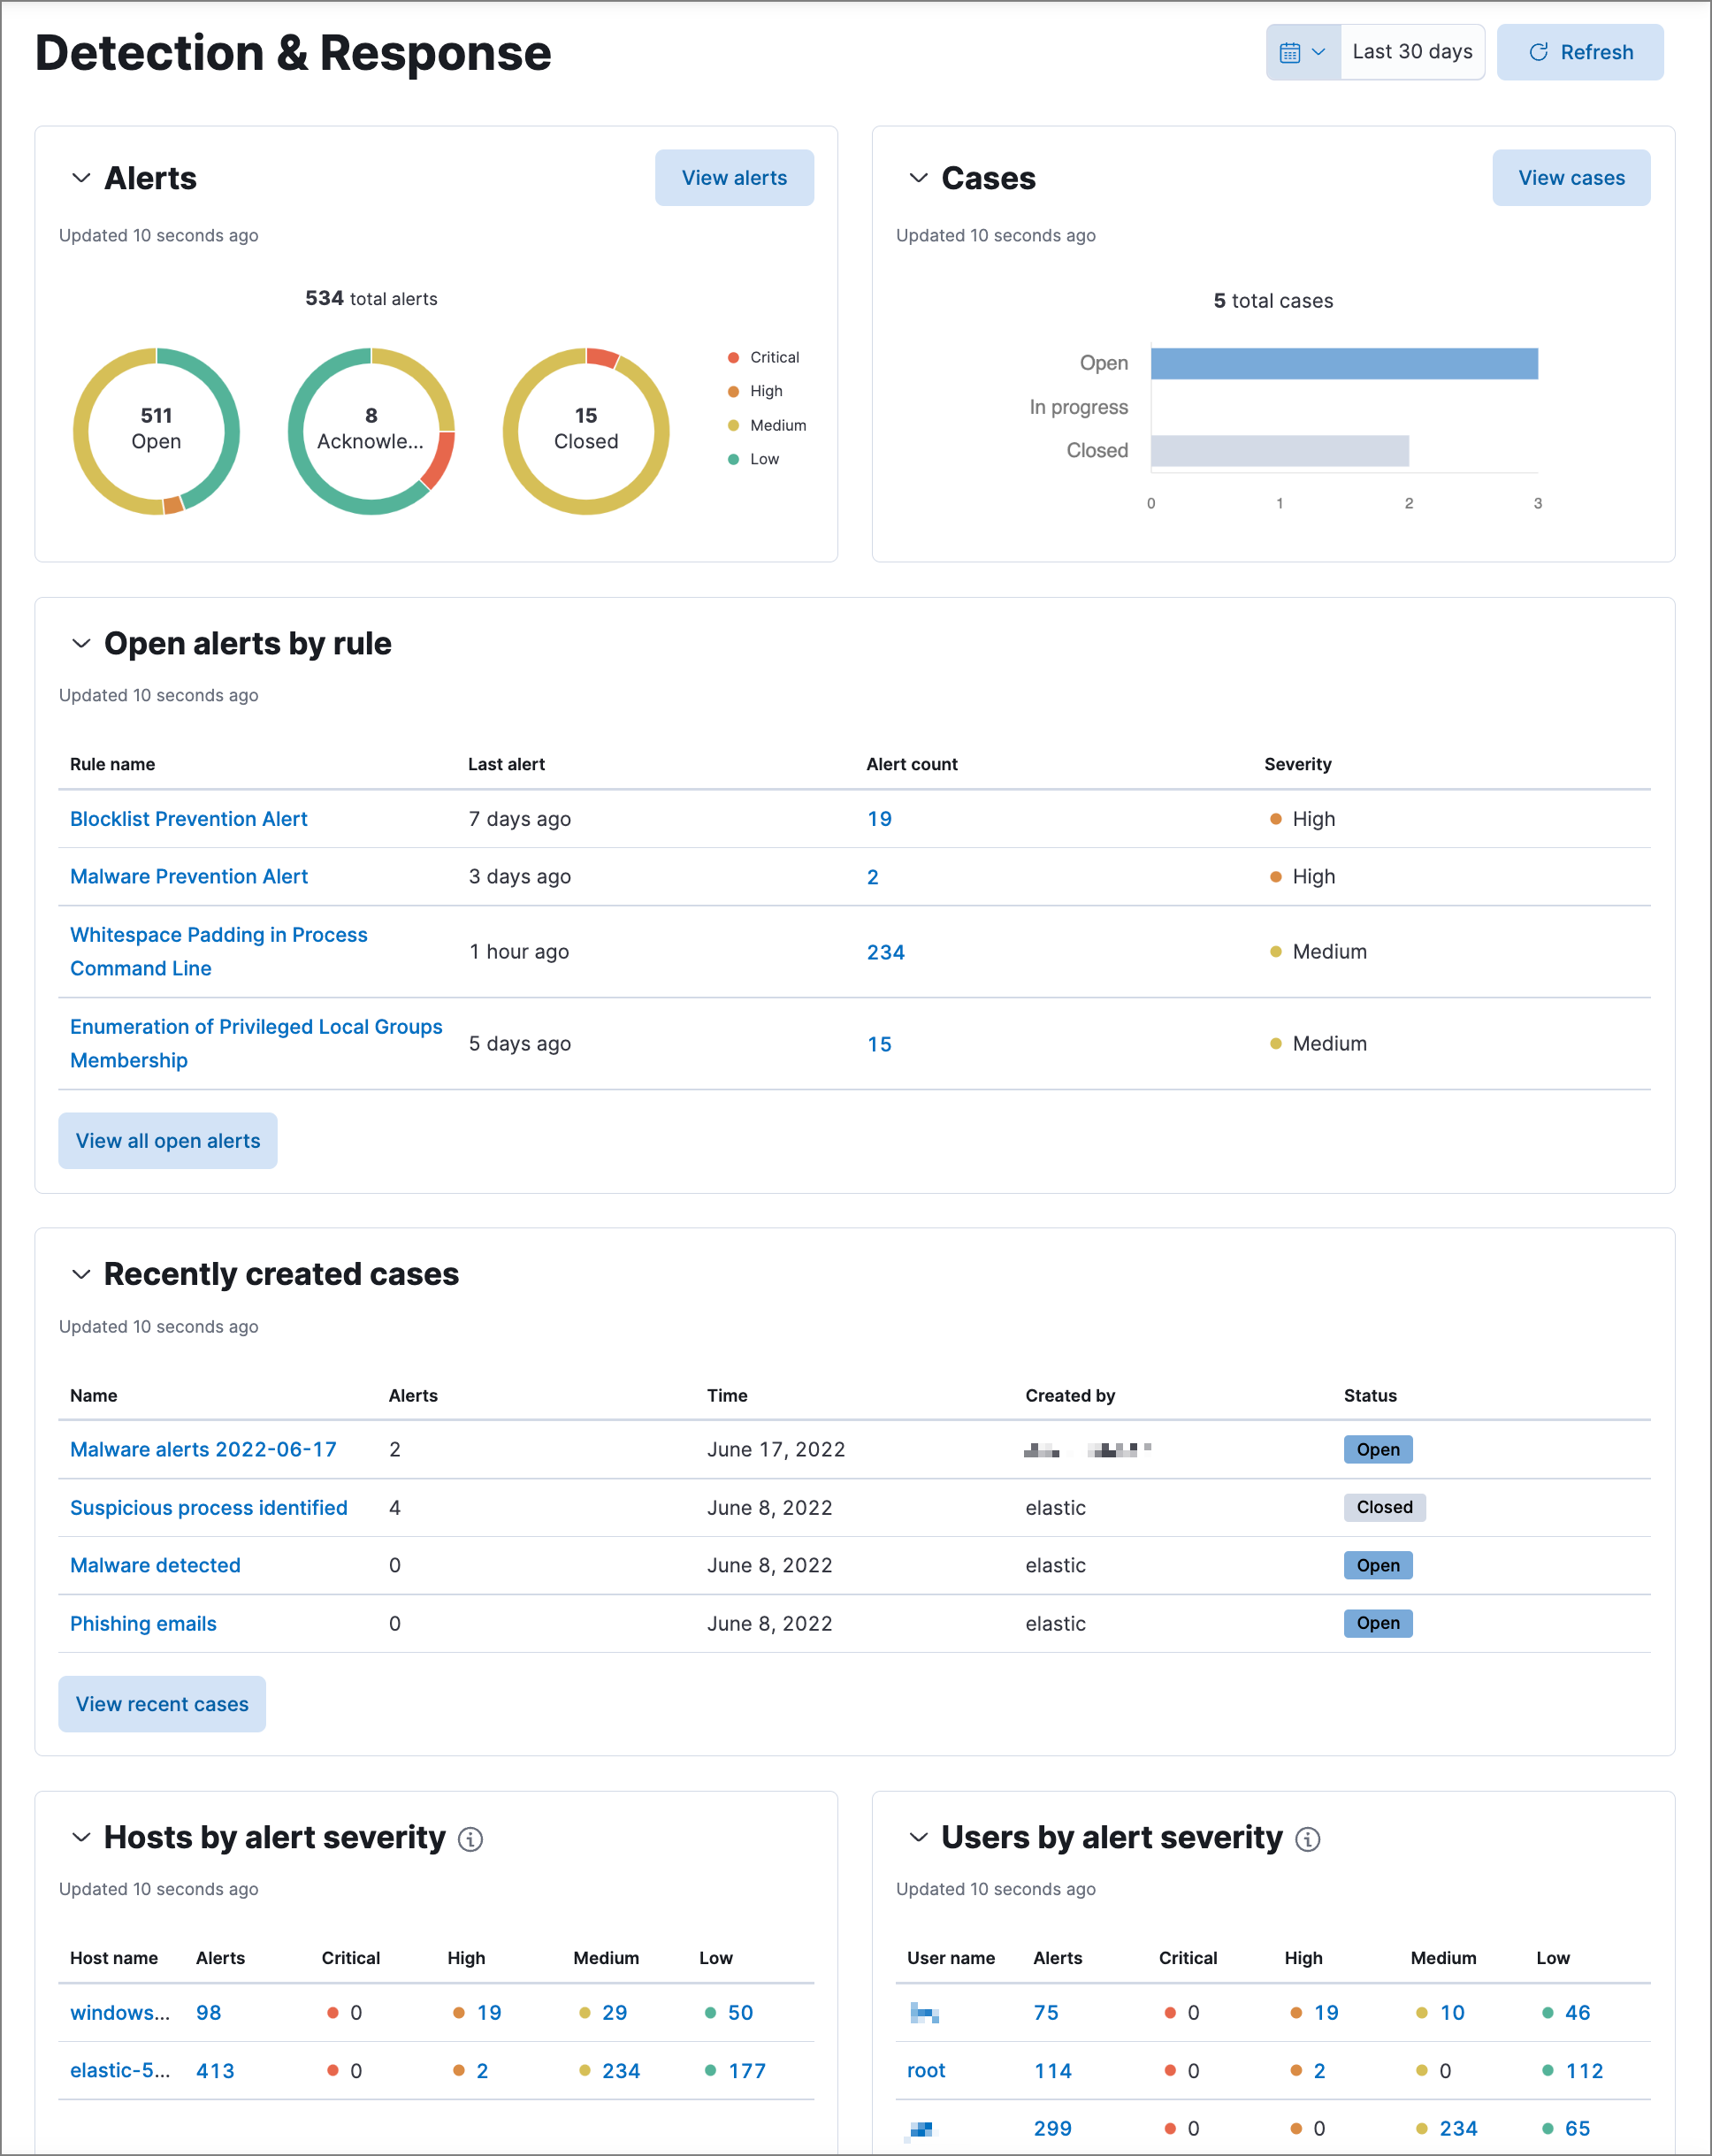 Overview of Detection & Response dashboard